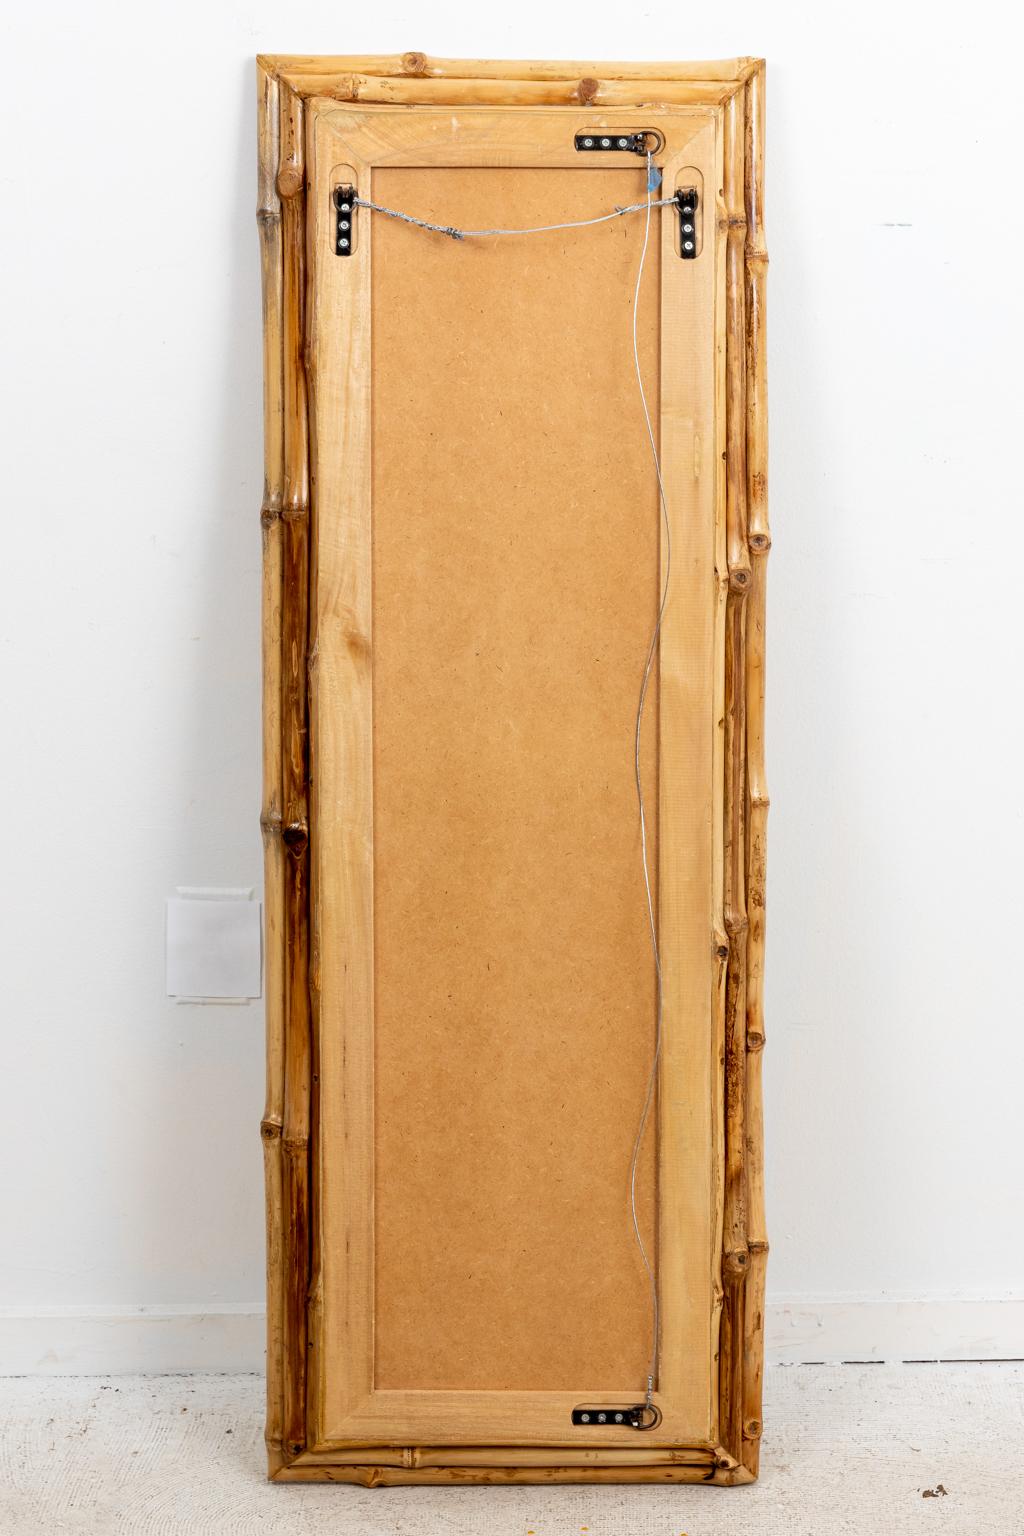 Circa 2000 light wood bamboo mirror with beveled mirror plate that can be hung vertically or horizontally. Please note of wear consistent with age including minor finish loss to the frame.